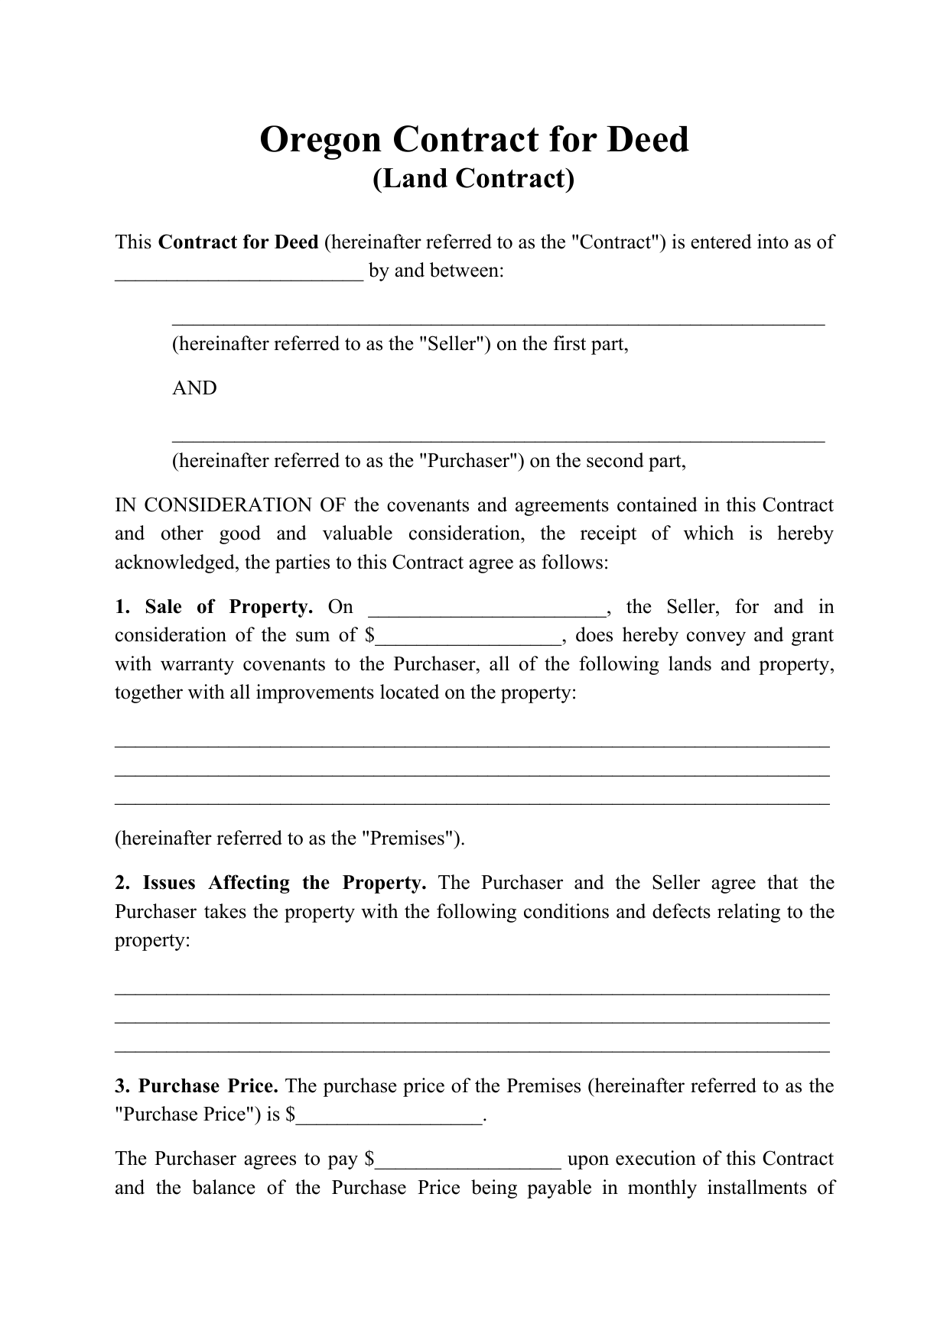 Contract for Deed (Land Contract) - Oregon, Page 1